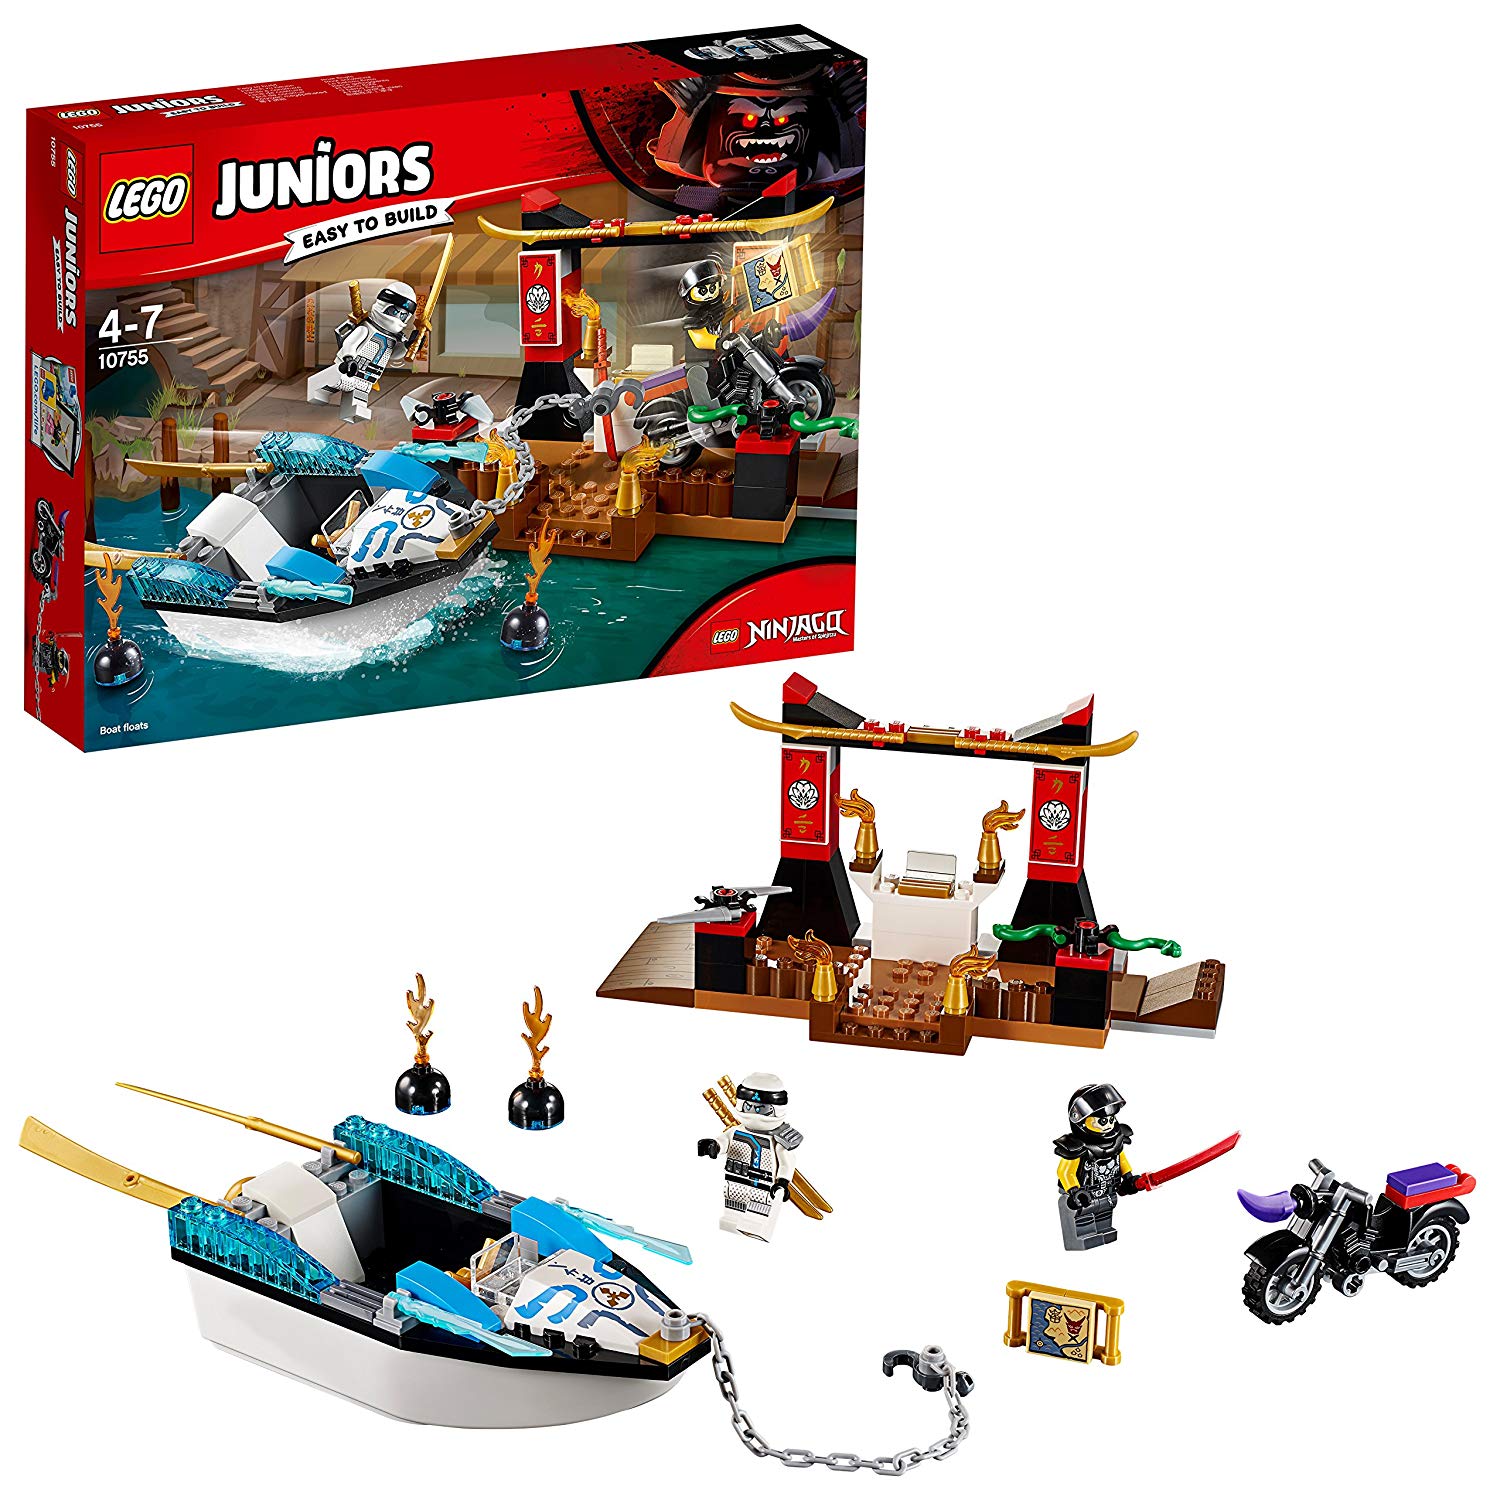 Lego Juniors Zanes Tracking Hunting With The Ninja Toy Boat